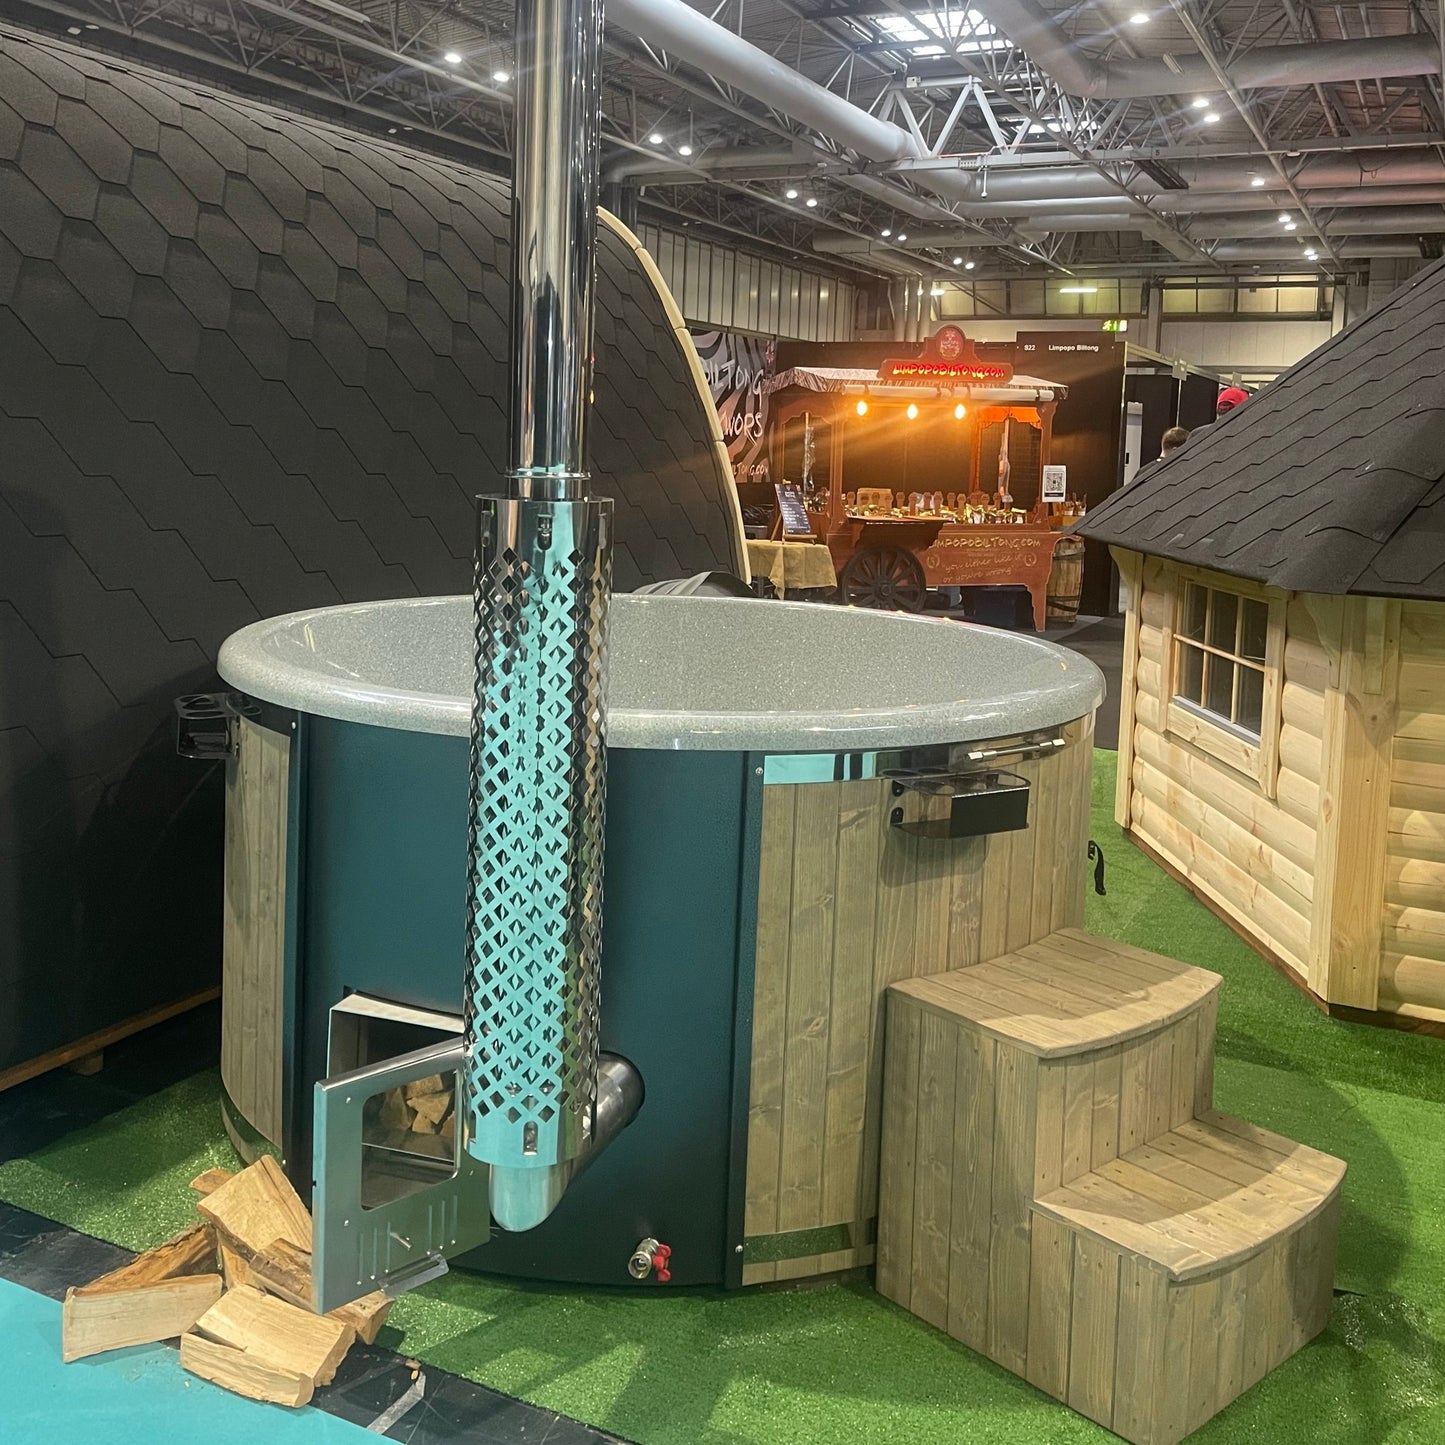 Premium 6-Person Wood-Fired Hot Tub: Stainless Steel Heater, Chimney & Secure Fastenings. Insulated, Pine Wood, 3D Granite Fiberglass, Air & Hydro Jets, LED Lights, Thermally Efficient Lid & Stairs. UK Delivery Included.